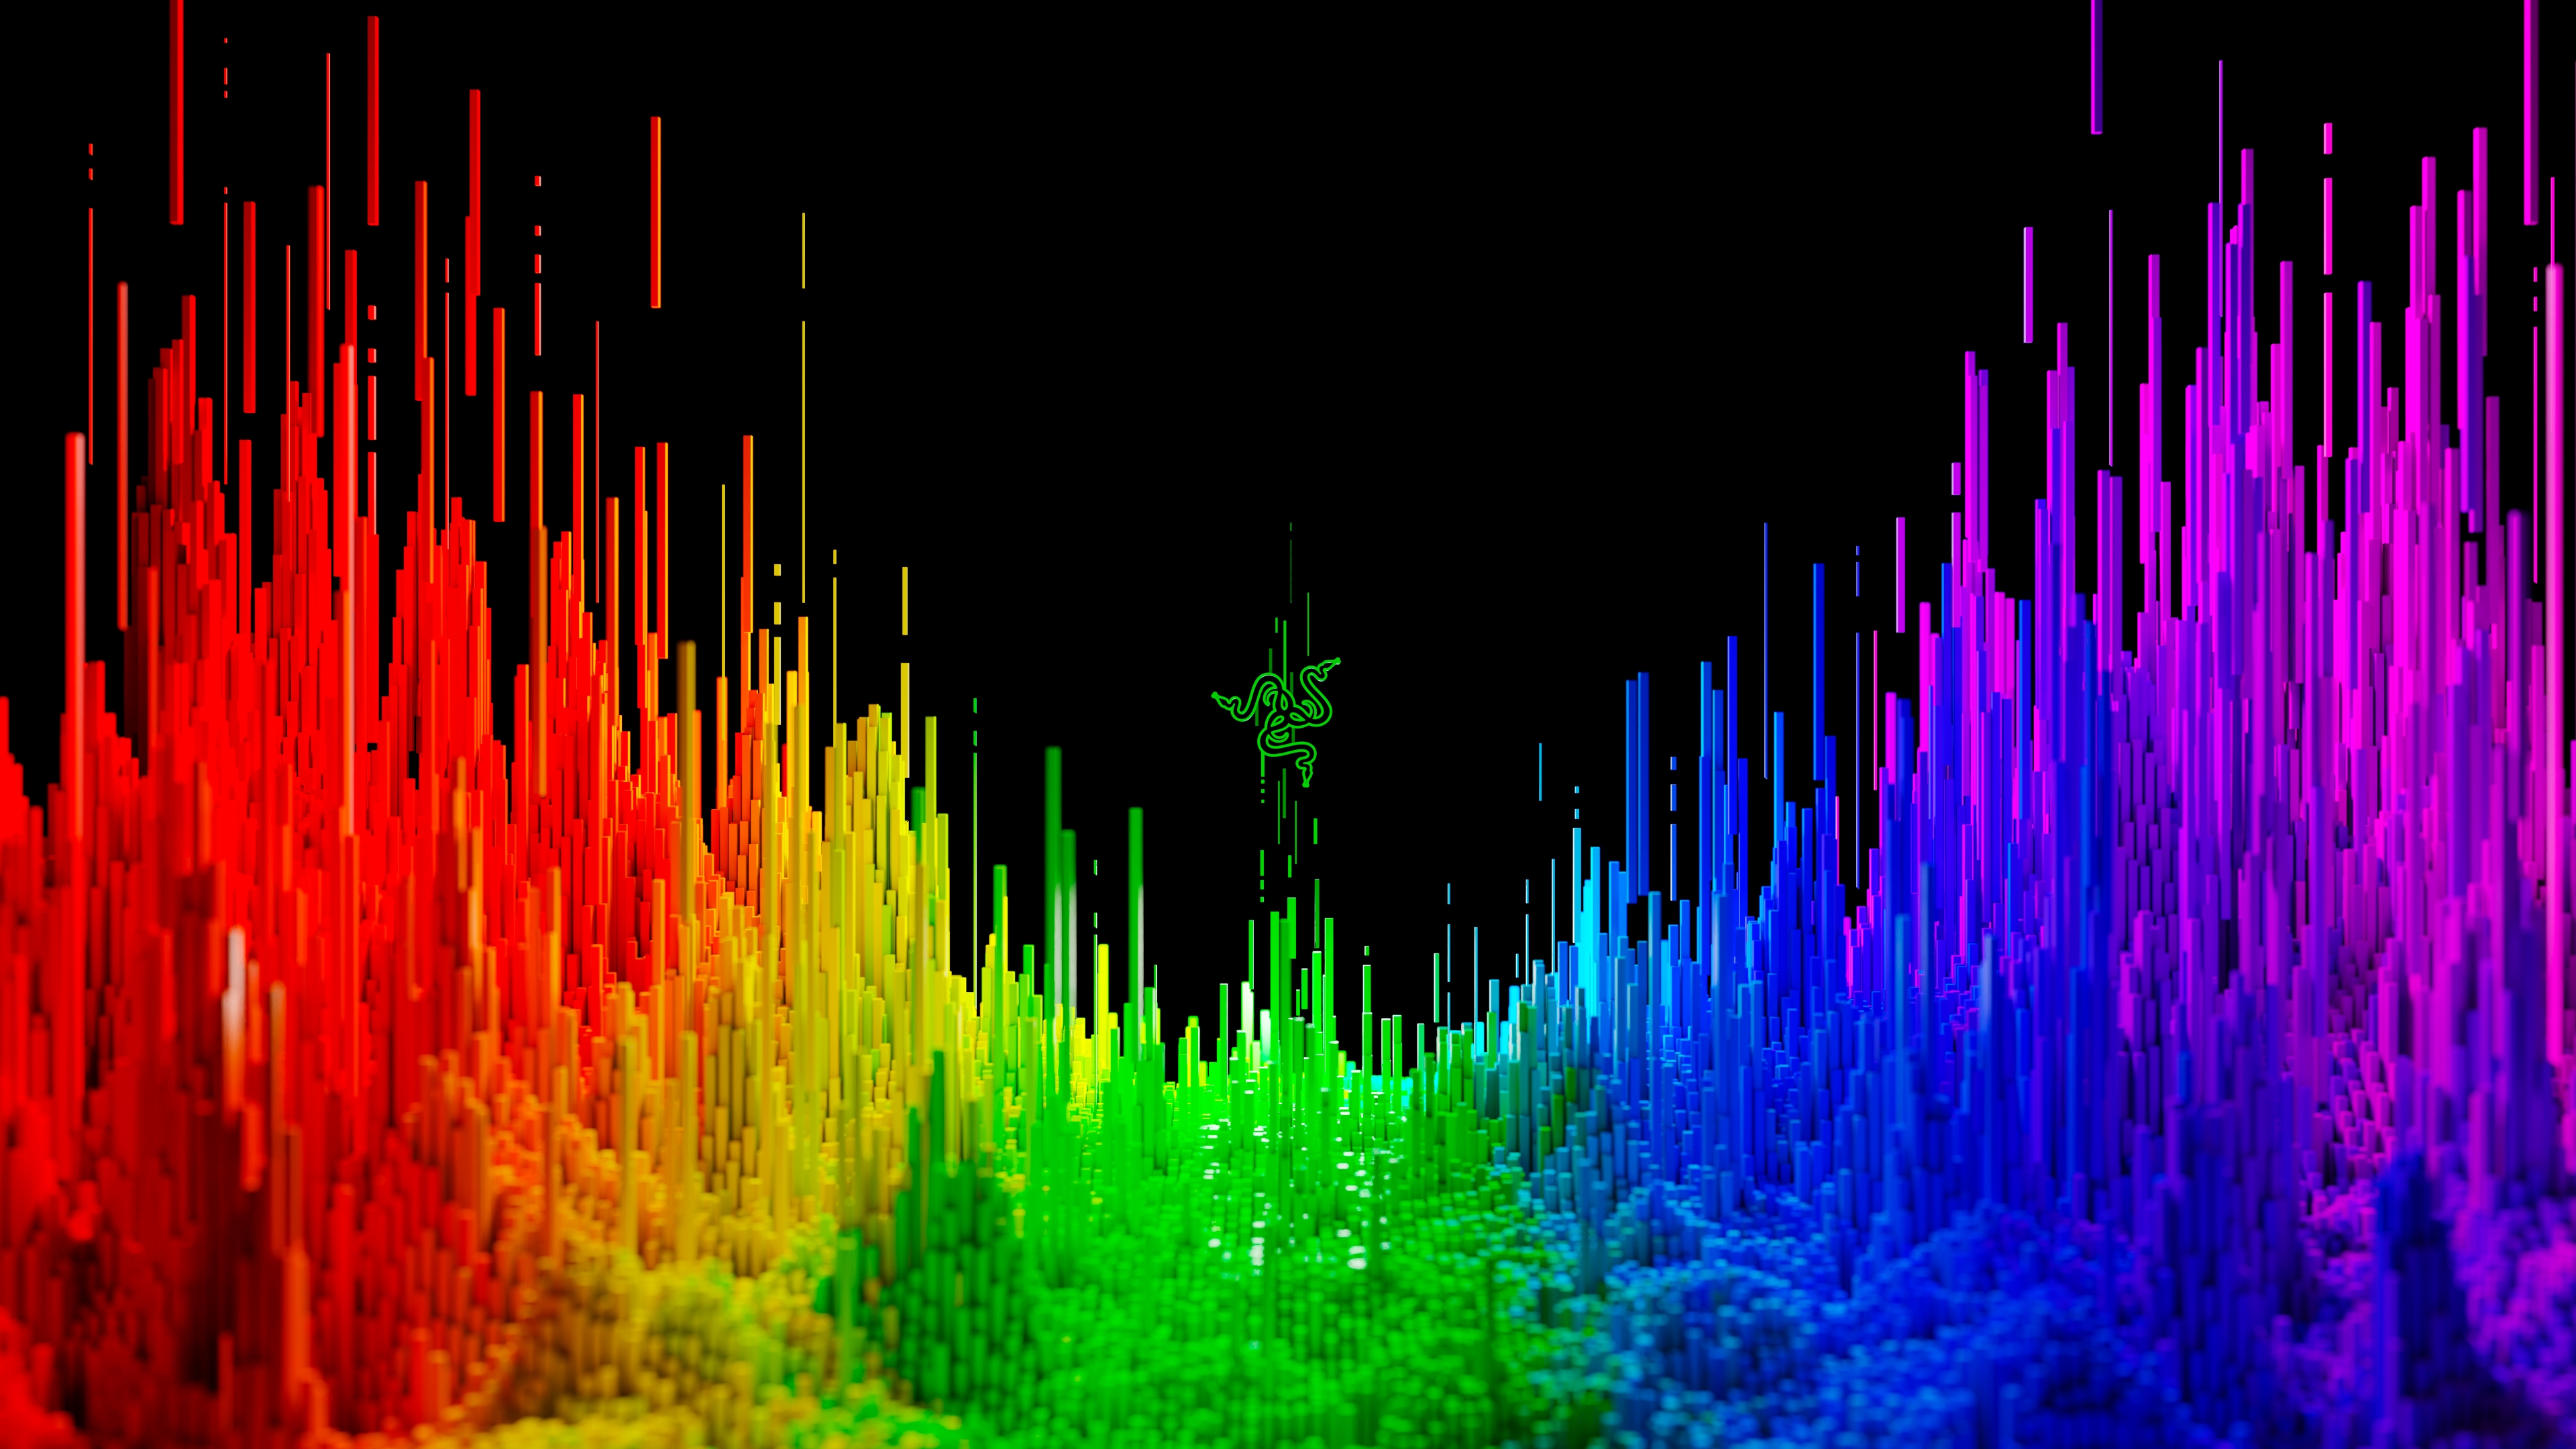 HD wallpaper, Razer, Multicolor, Sound Waves, Spectrum, Frequency, Colorful